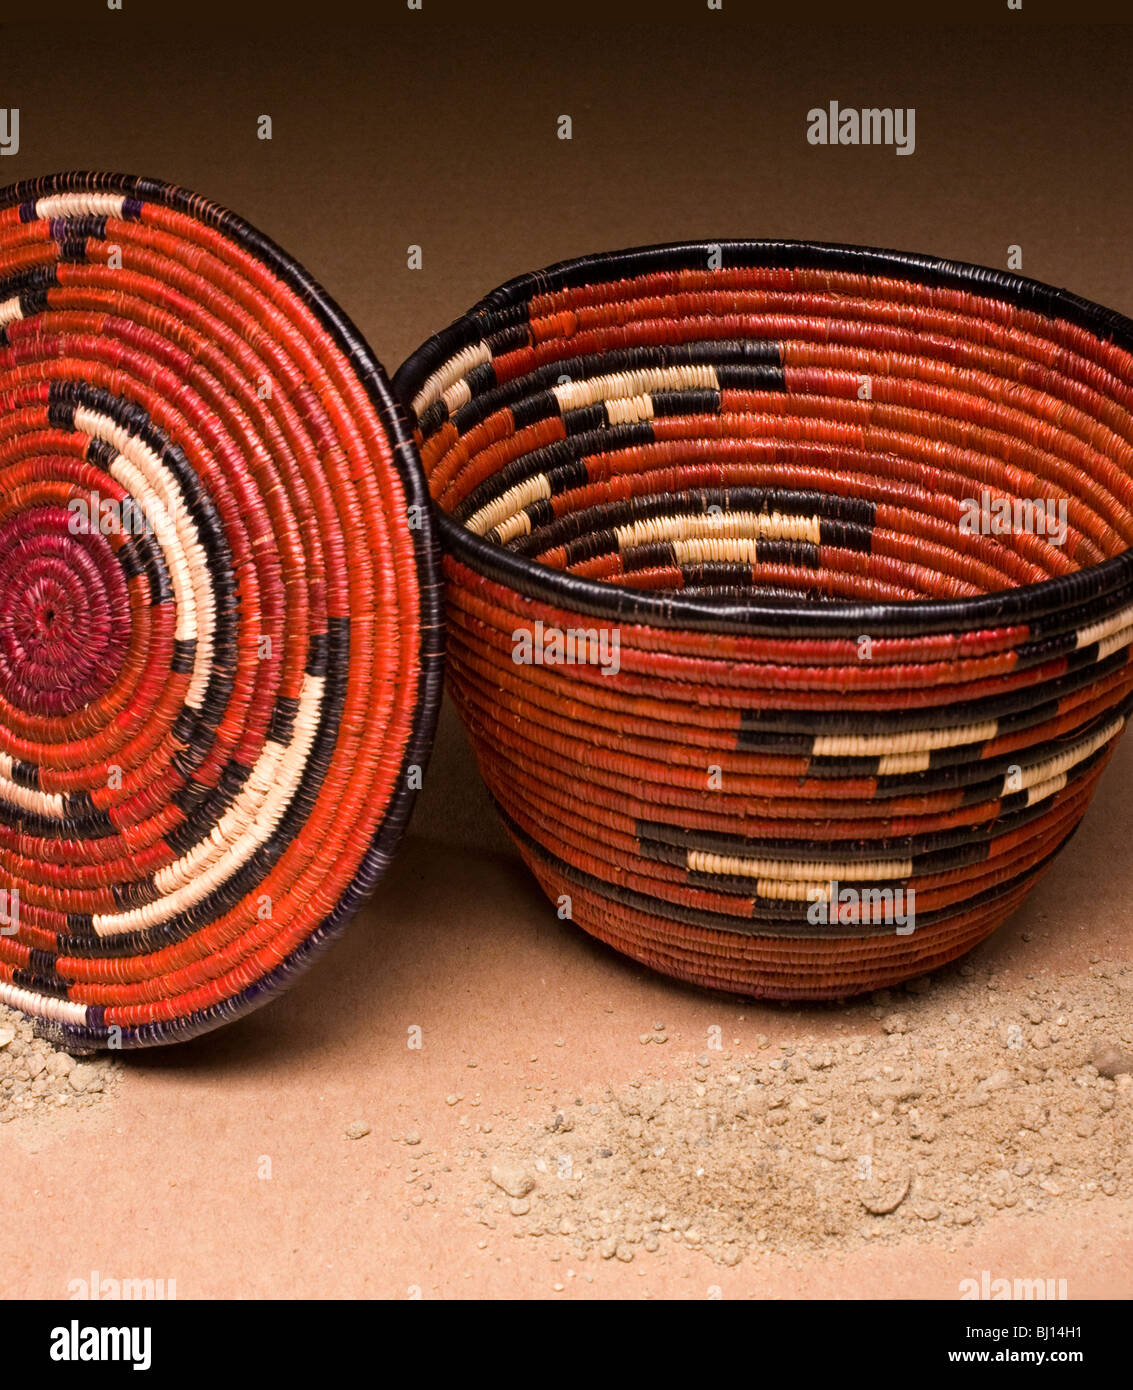 Basket made by women of Darfur in project to empower poor women of Darfur. Stock Photo